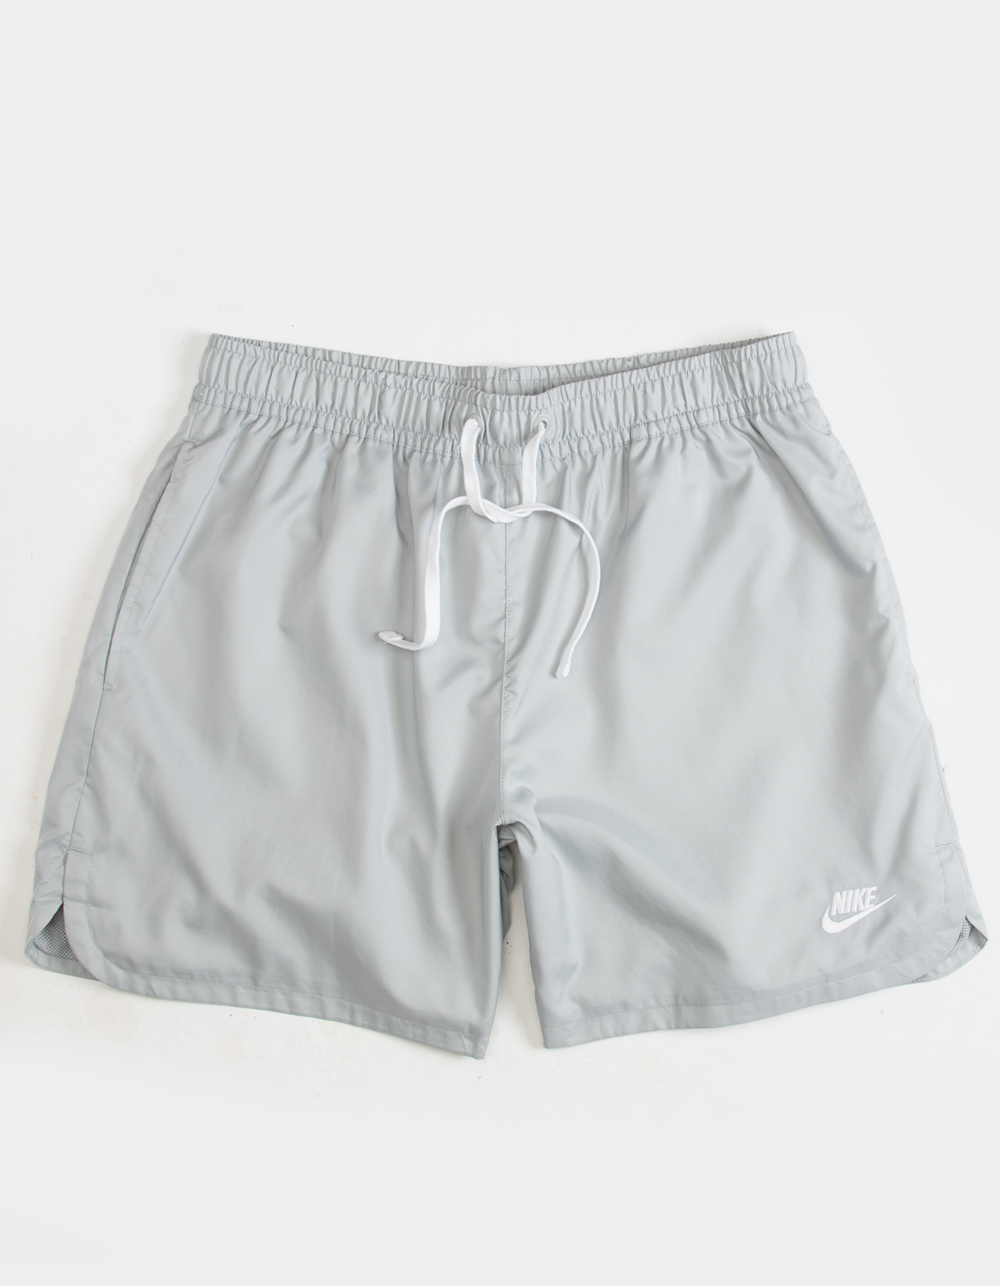 Nike Sportswear Sport Essentials Woven Lined Flow Shorts Mens, Light  Marine/White, 3X-Large at  Men's Clothing store